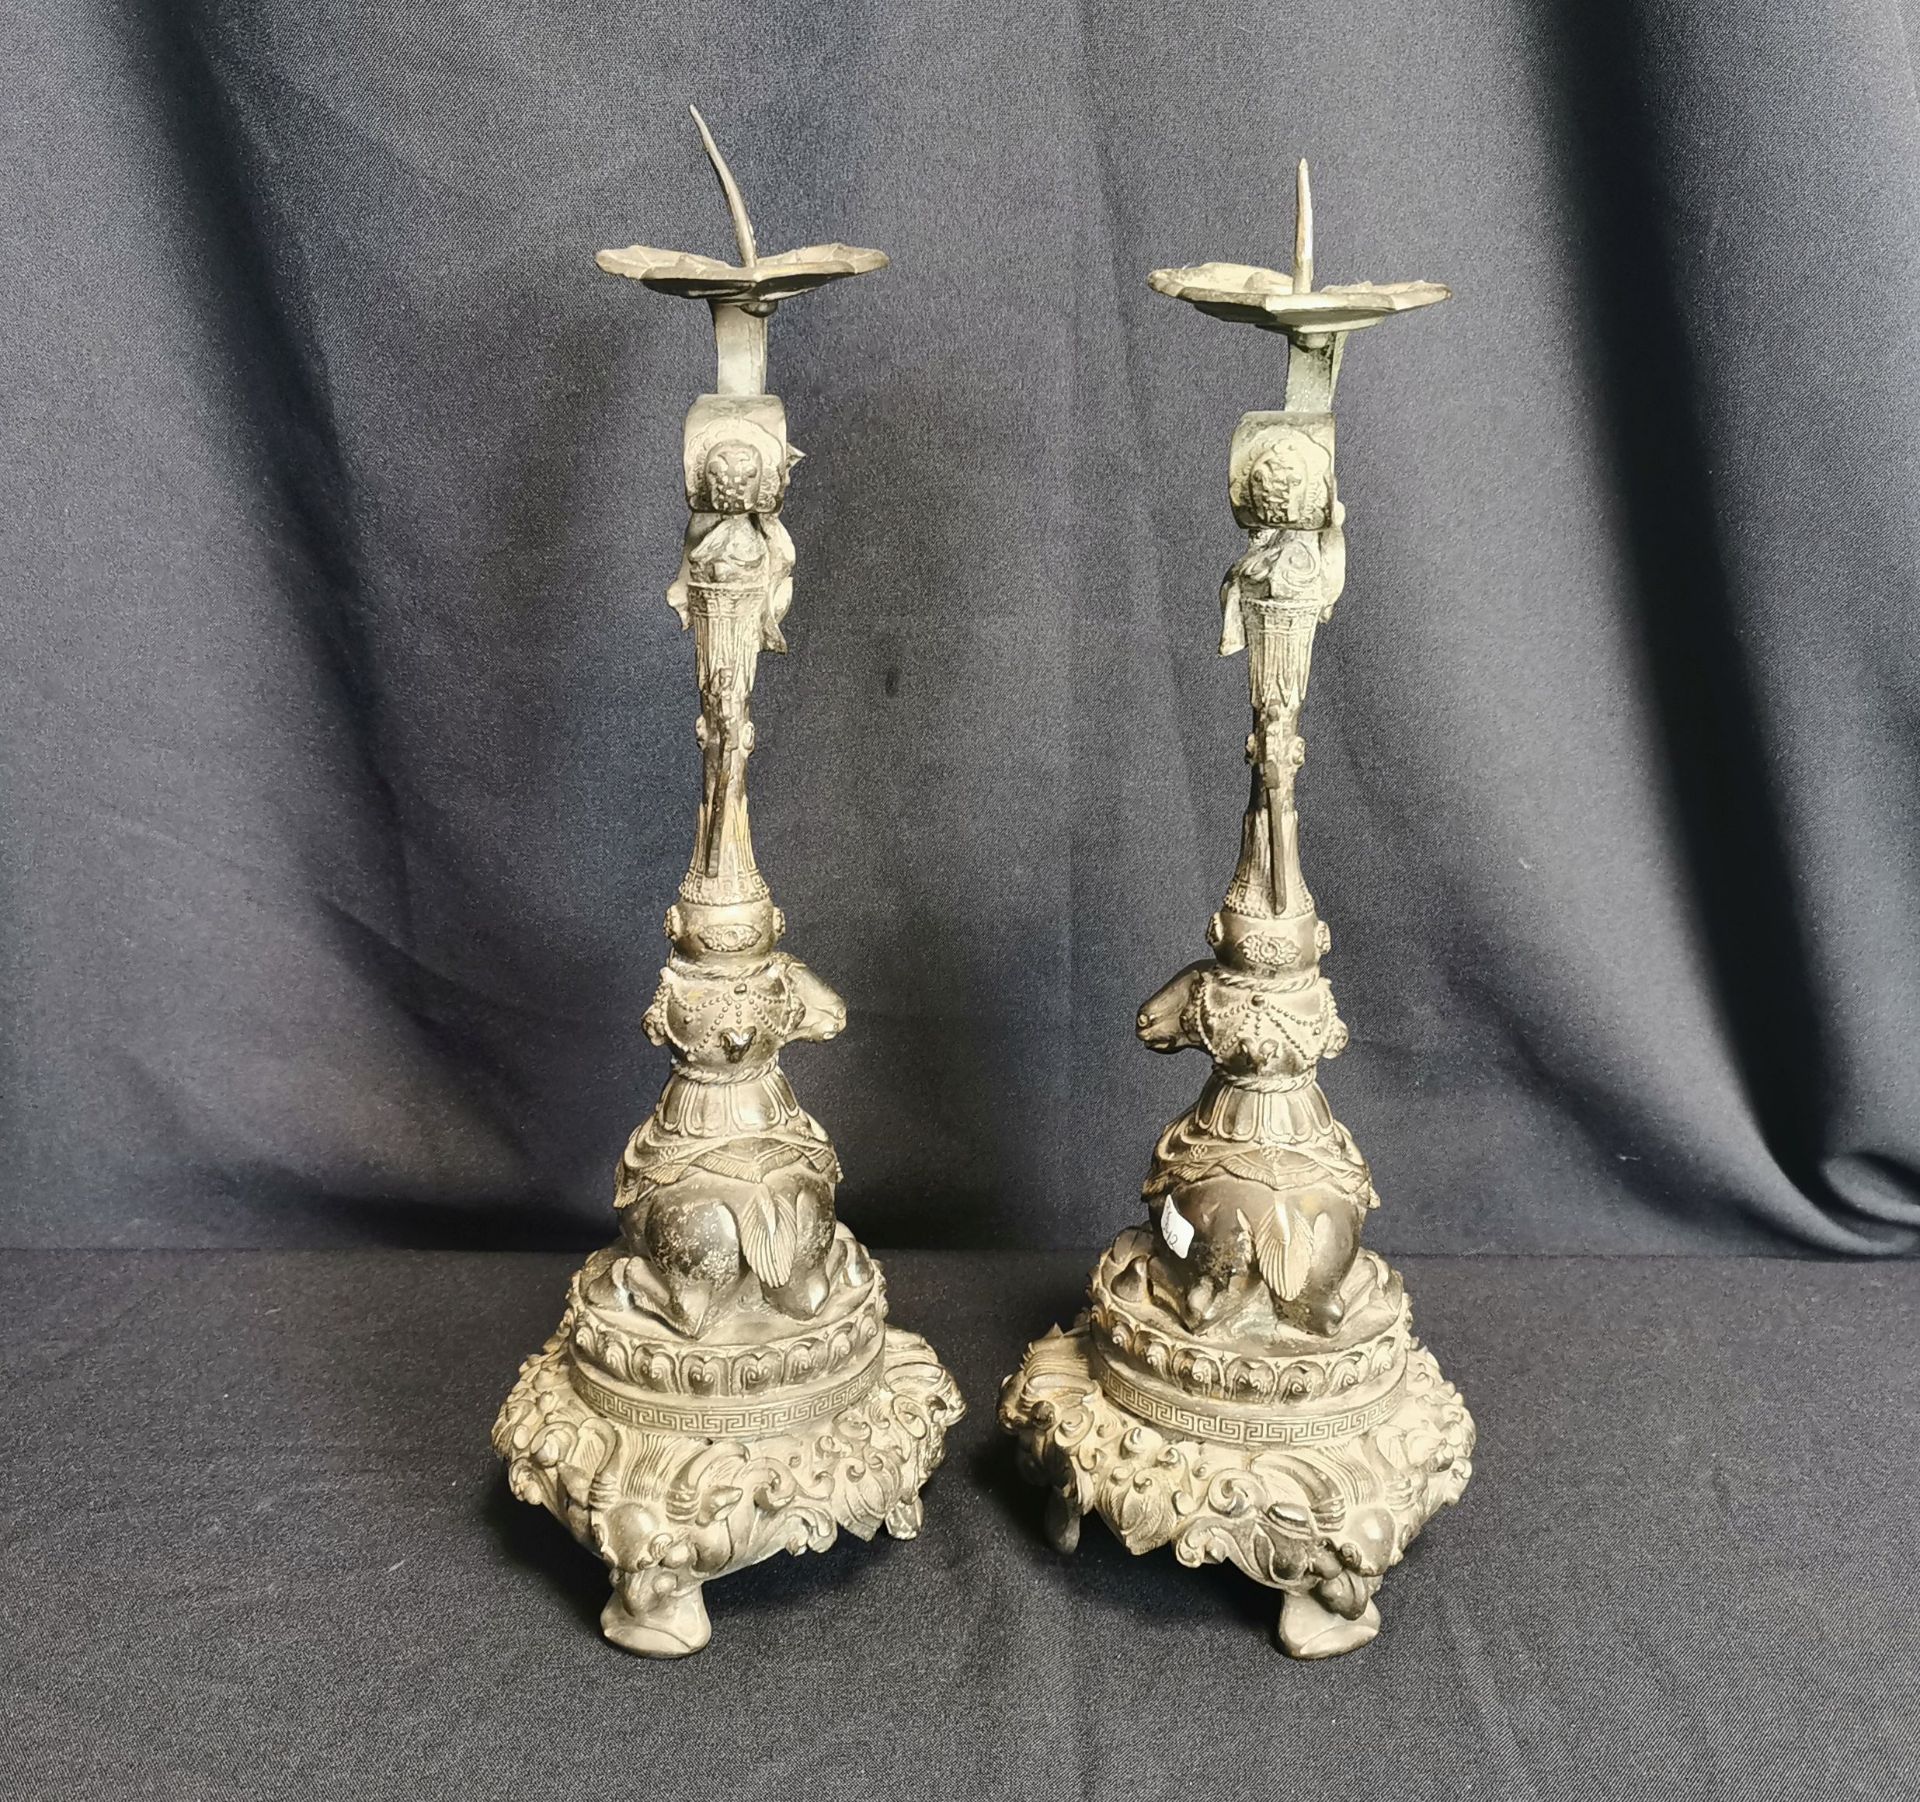 PAIR OF CANDLE STANDS WITH RAMS - Image 6 of 7